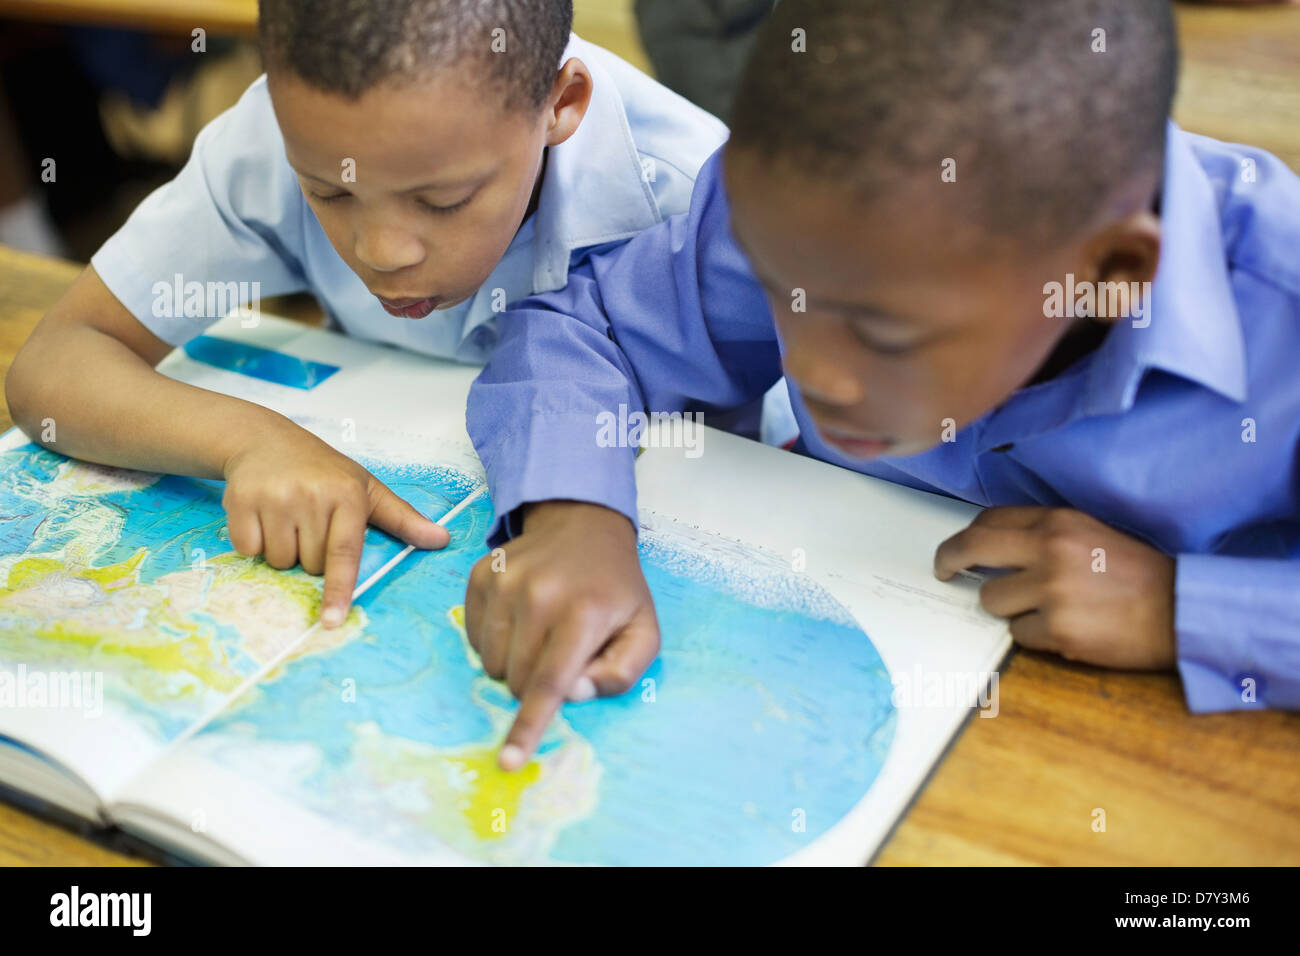 Students using world map in class Stock Photo